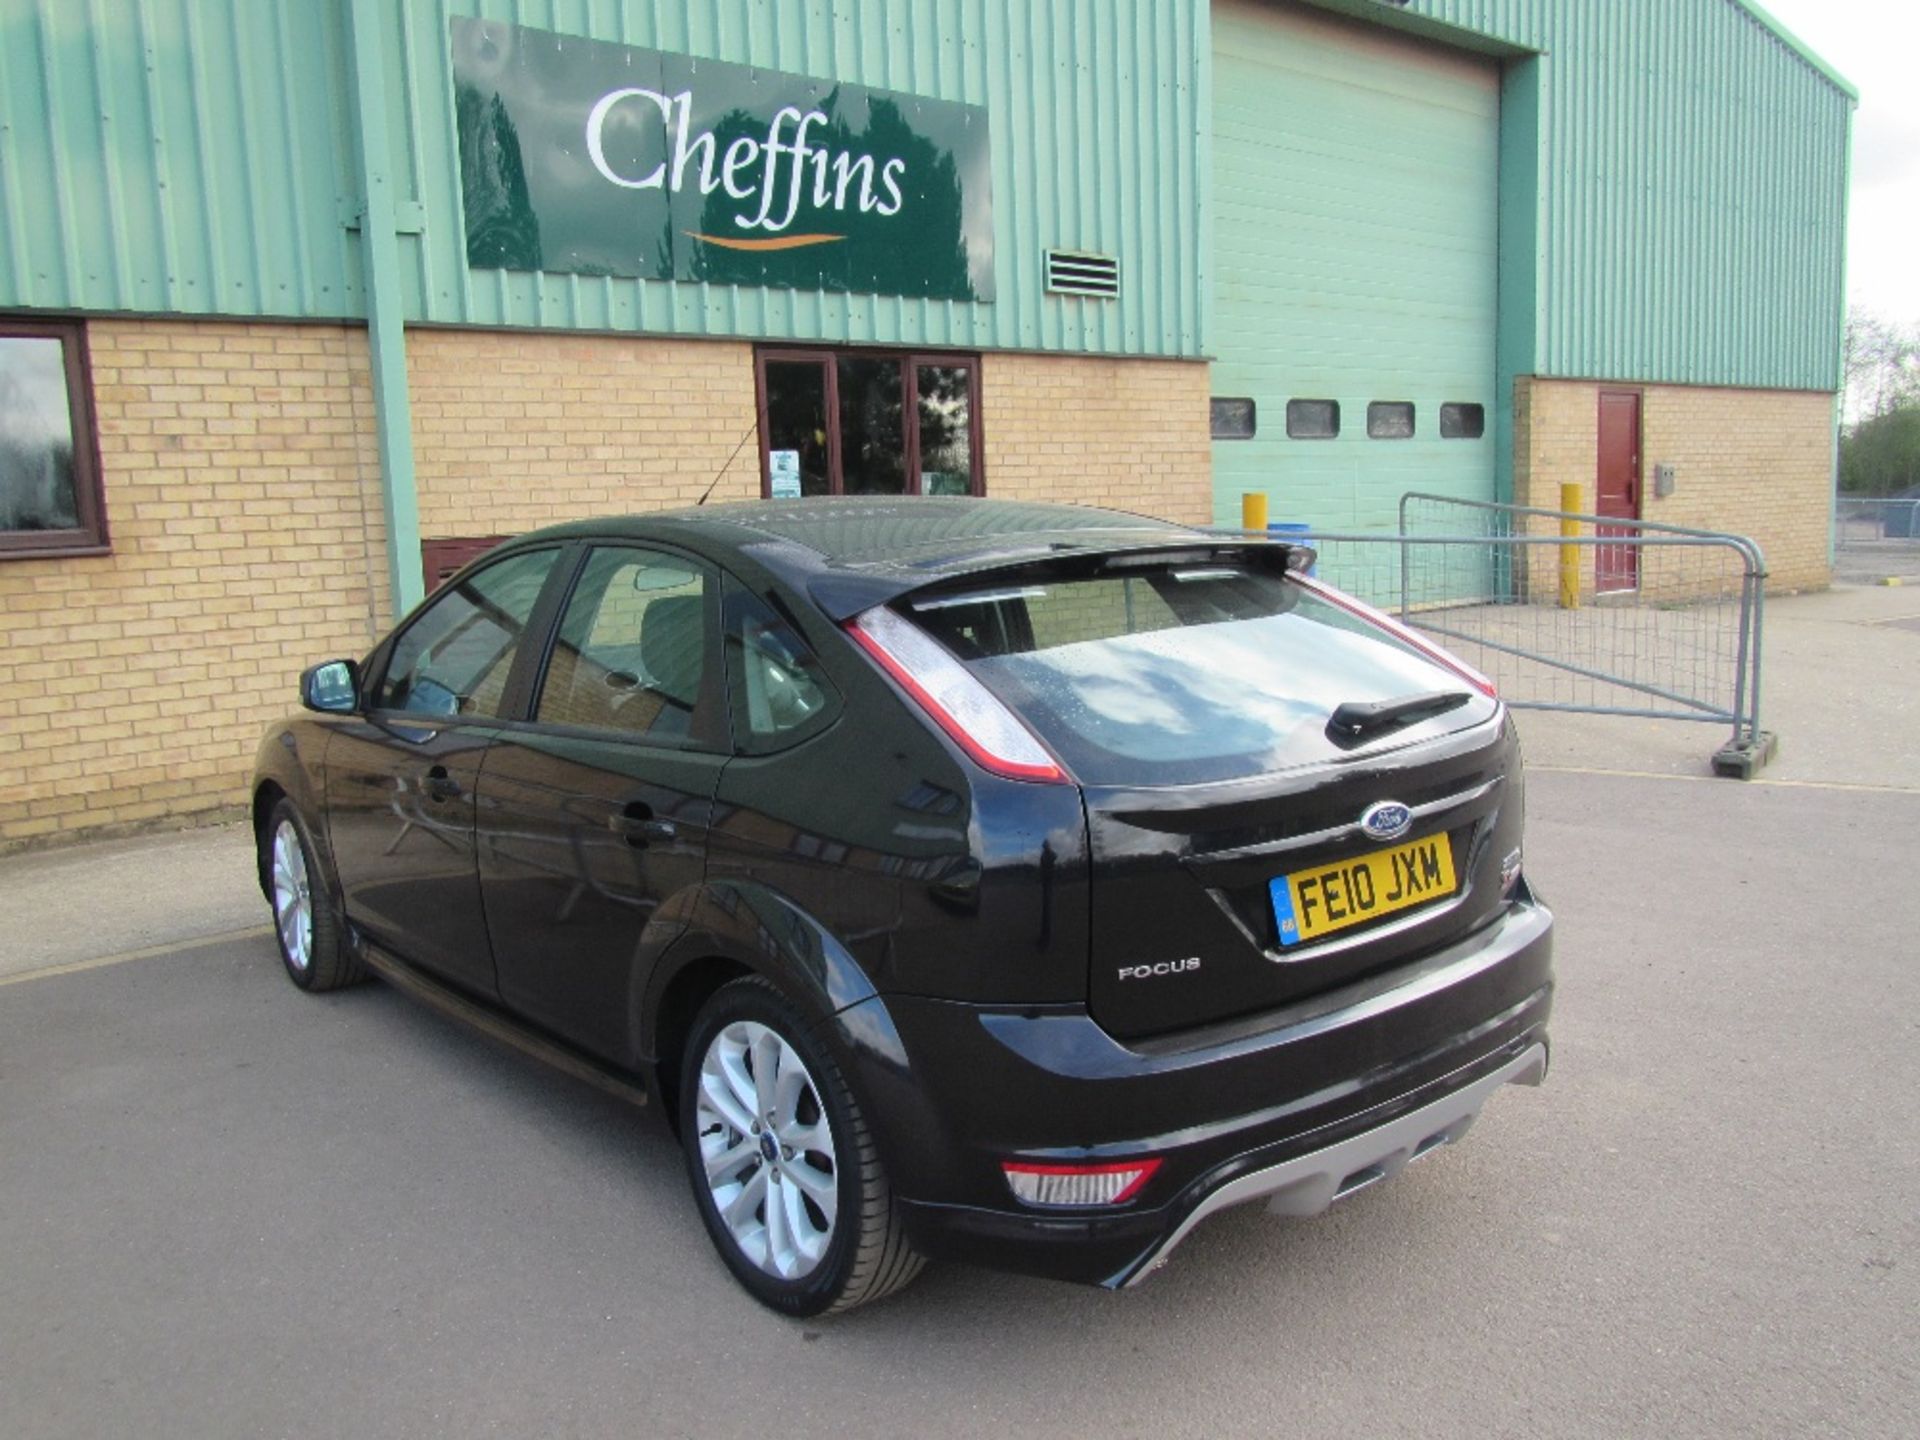 Ford Focus 1.6 Diesel Zetec 5 TDCI 109. Black. 1 keeper. Reg Docs will be supplied. Mileage: 117,546 - Image 6 of 6